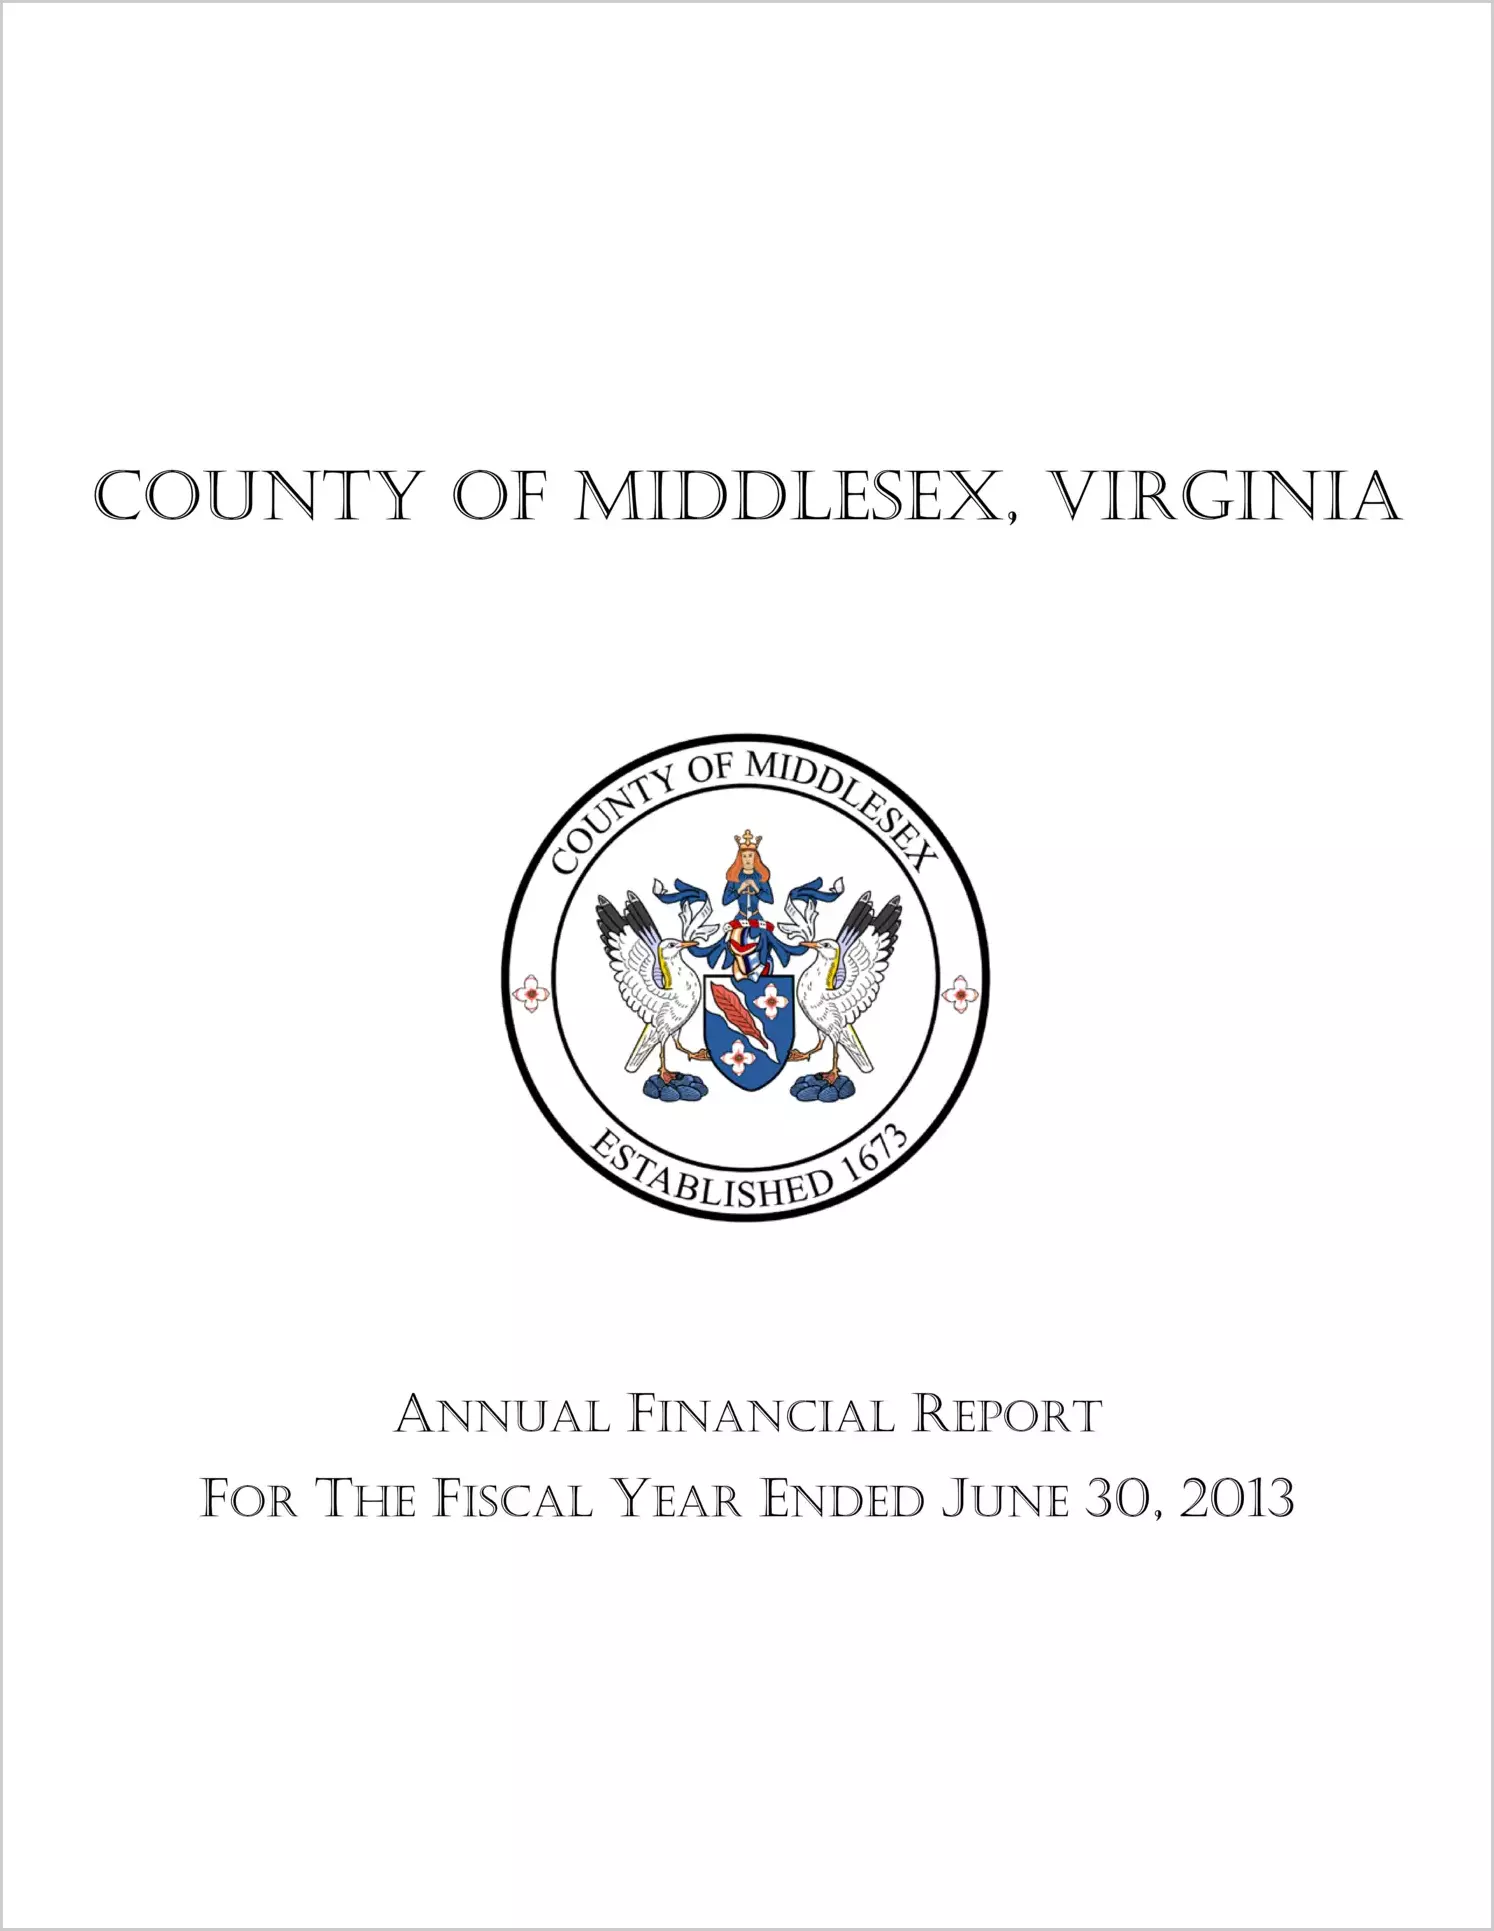 2013 Annual Financial Report for County of Middlesex